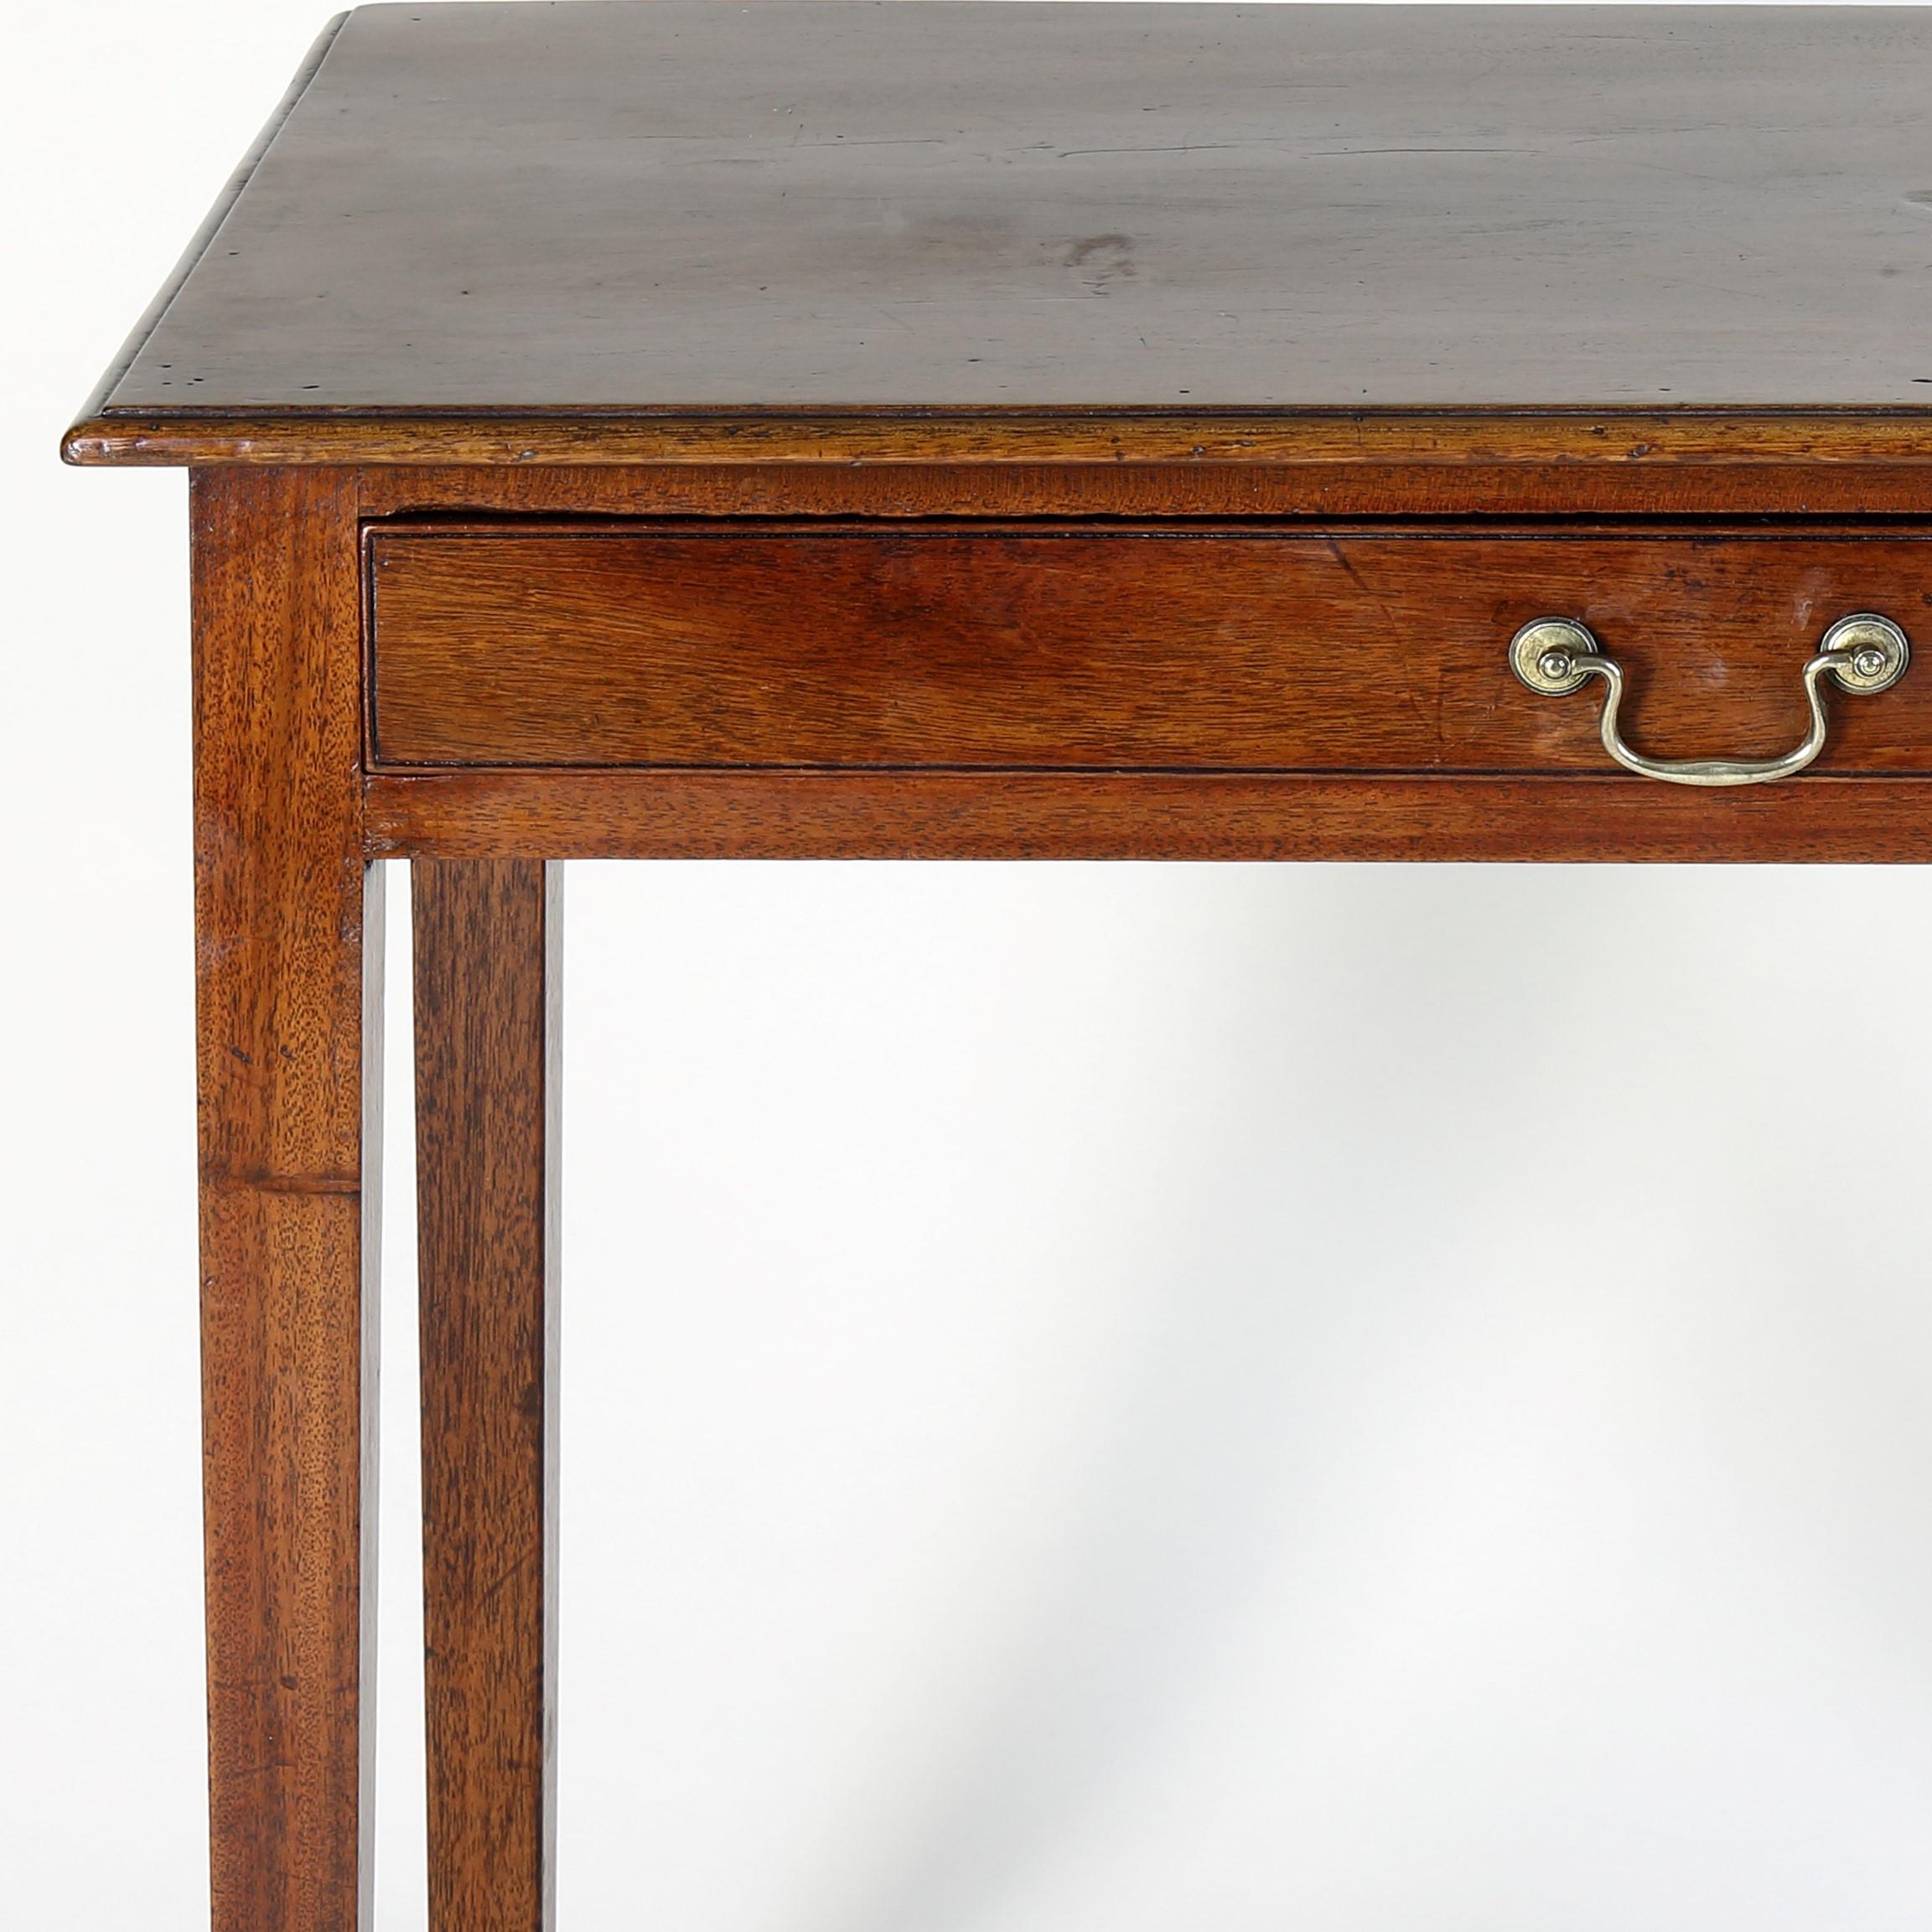 A good late 18th century mahogany single drawer side table with rectangular moulded edge top above a long apron drawer and standing on four square tapering legs.
In original condition including the central brass swan-neck handle. a simple yet